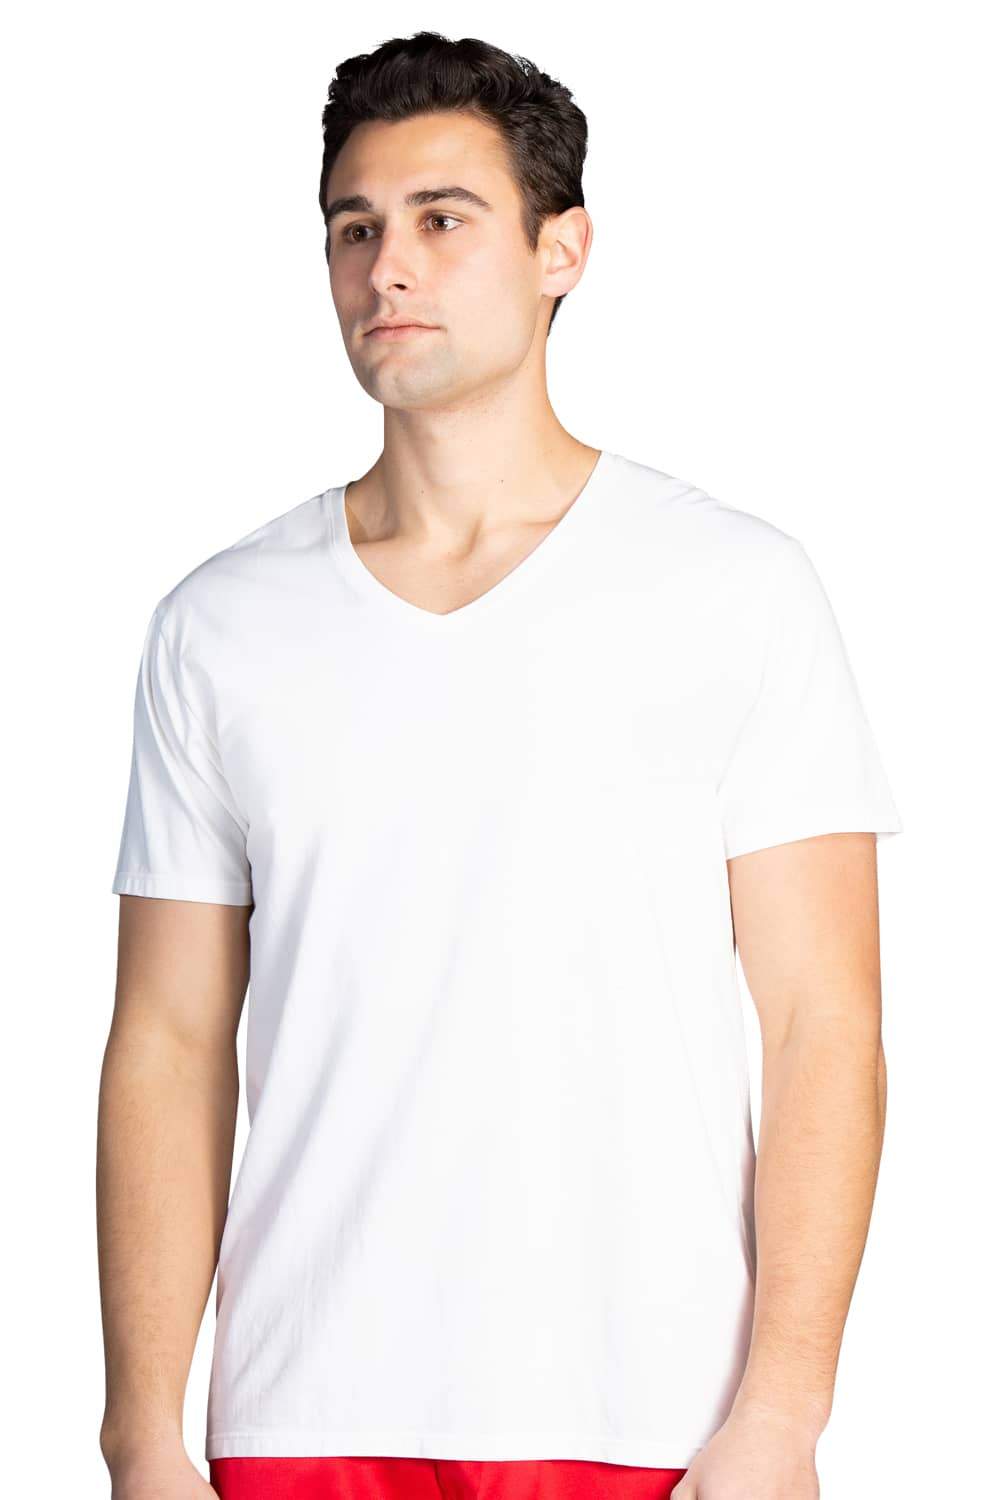 Men's Classic Fit Soft Stretch V-Neck Undershirt Mens>Casual>Tops Fishers Finery White Small Single Pack